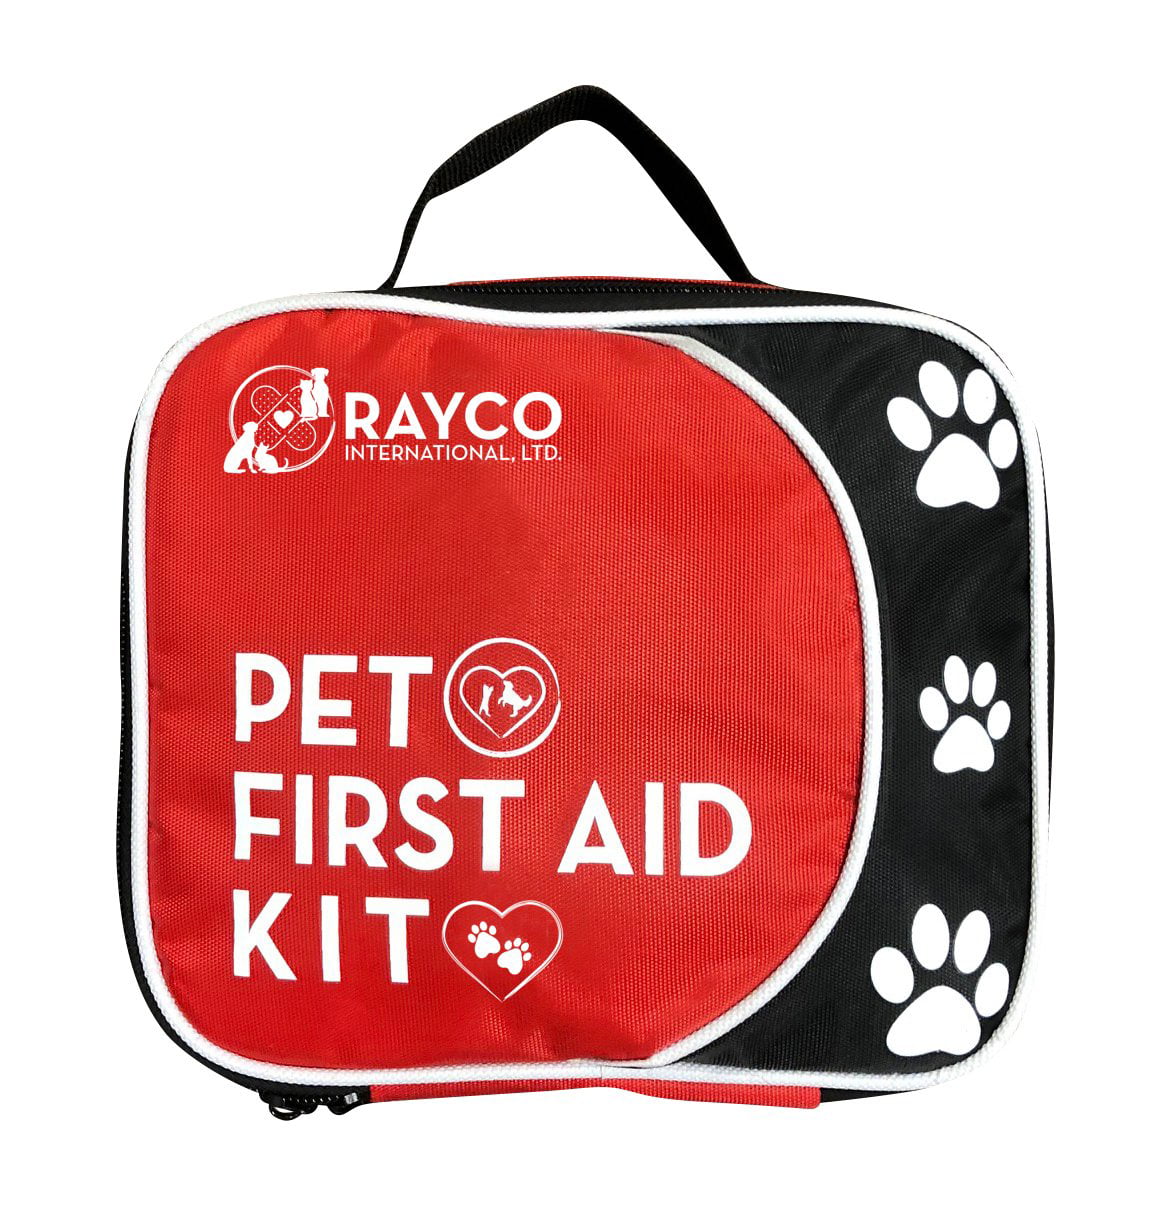 45pc Pet First Aid Disaster Kit Emergency Relief